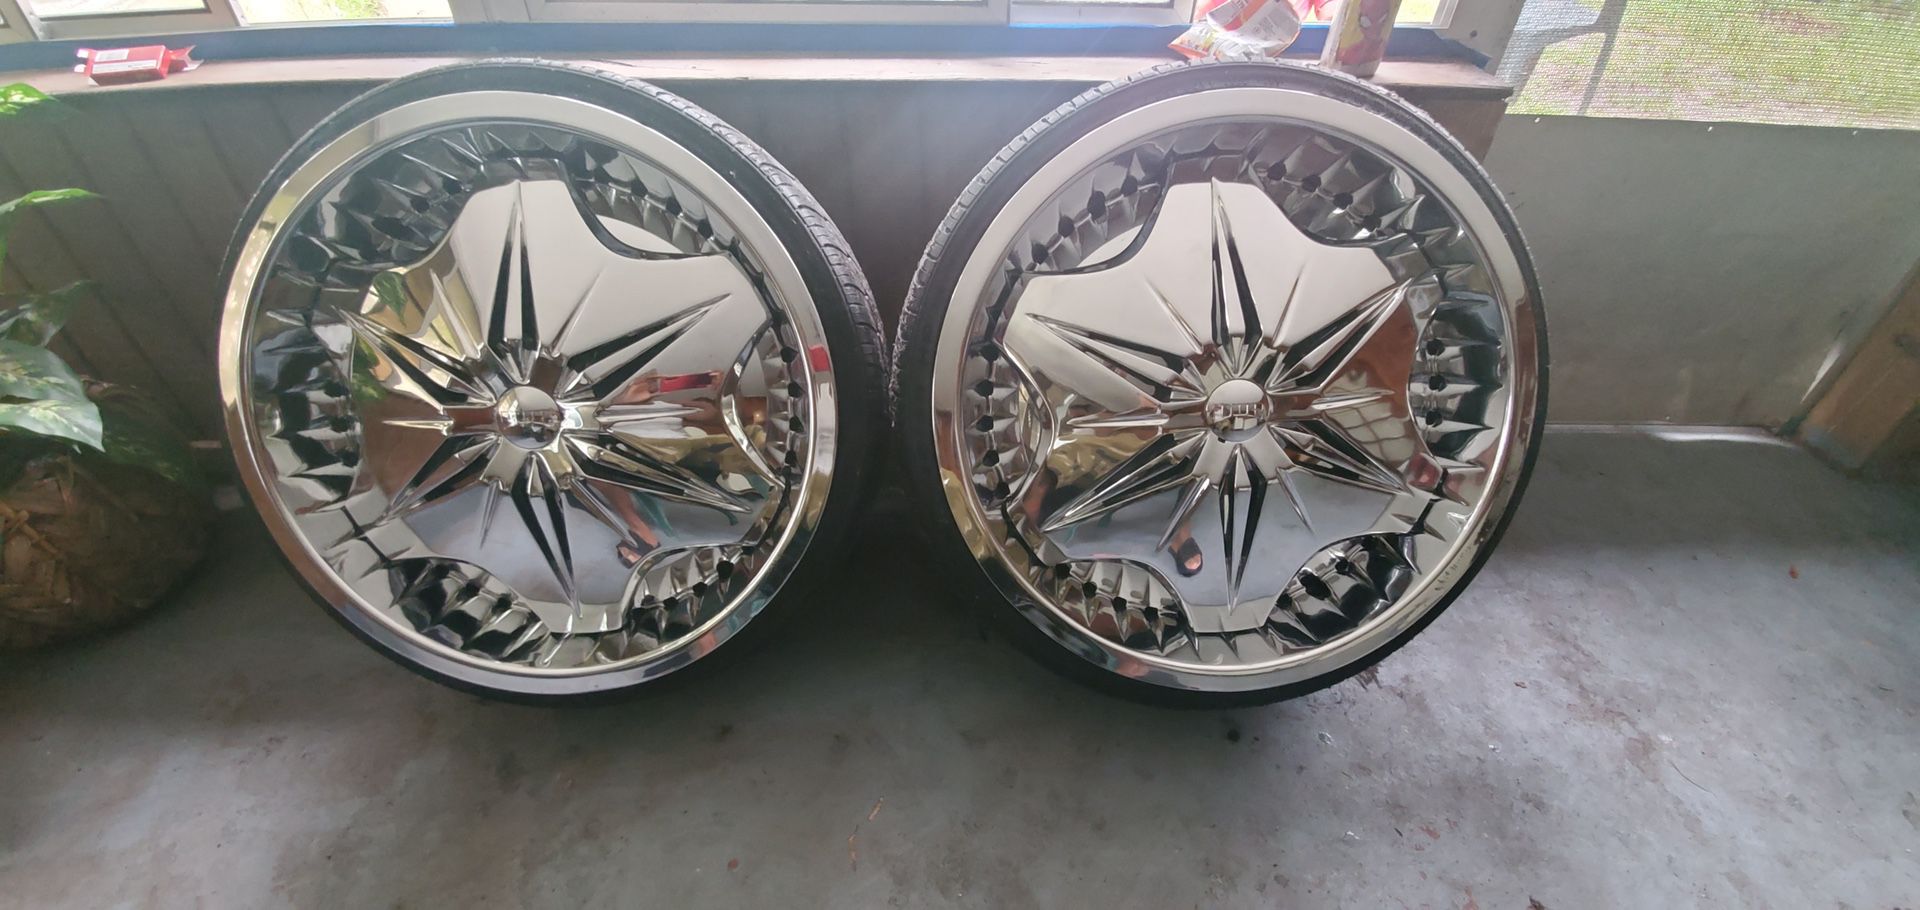 I have a pair of 22 inch voodoo rims for $1,000 or best offer Also it has all pieces nothing missing. Good threading on tires good spinner’s serious